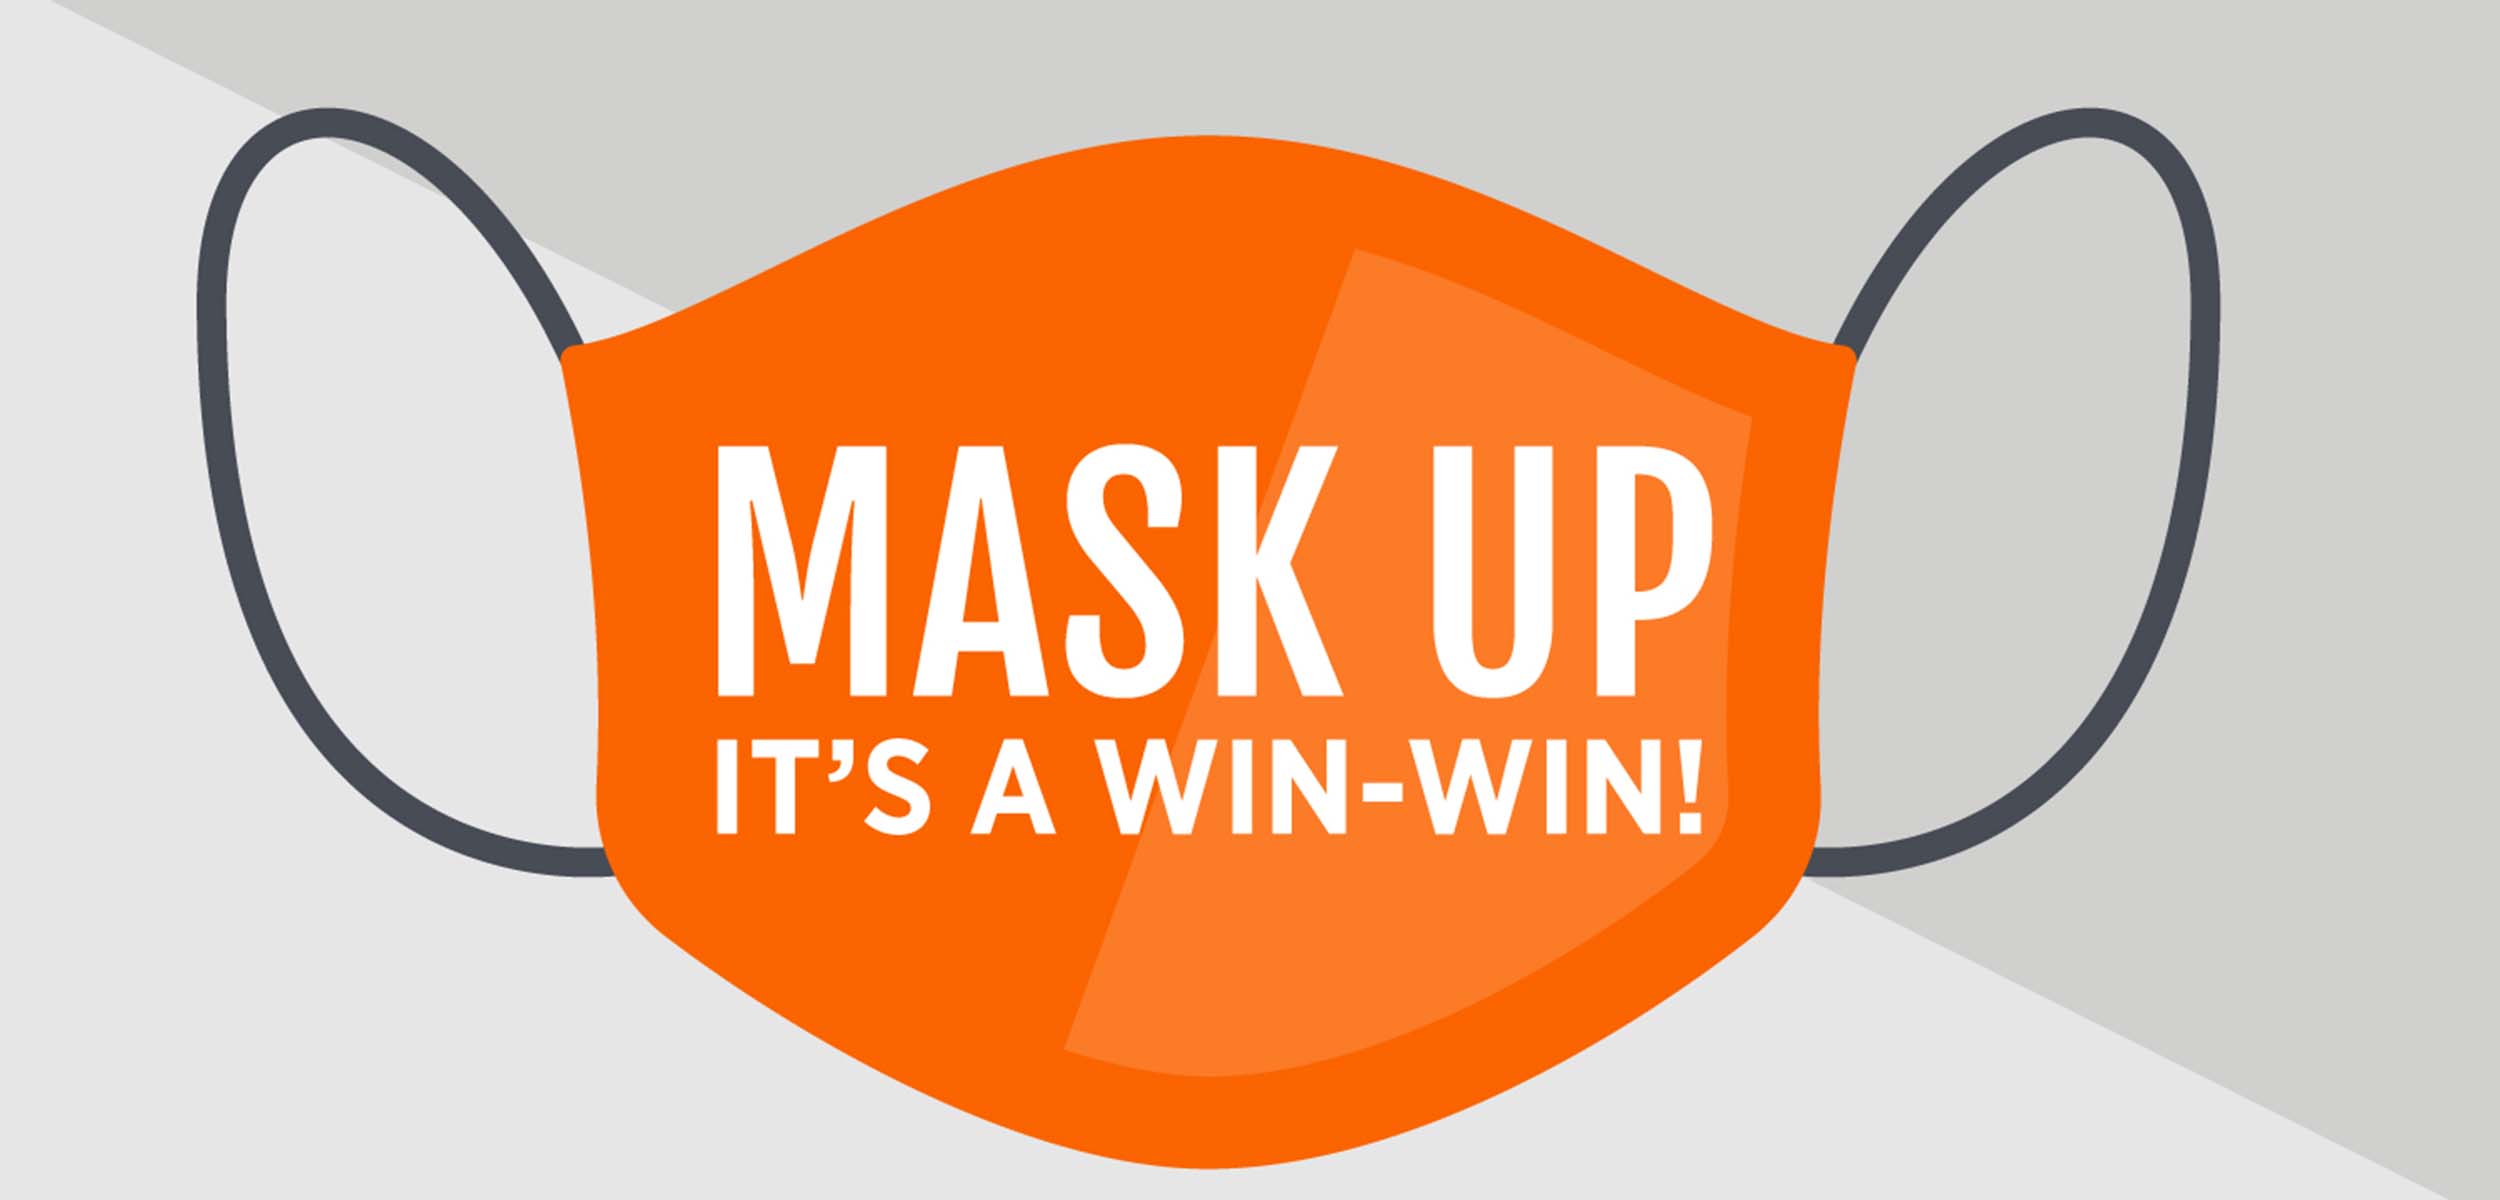 An orange mask with the word "MaskUp" written across it.